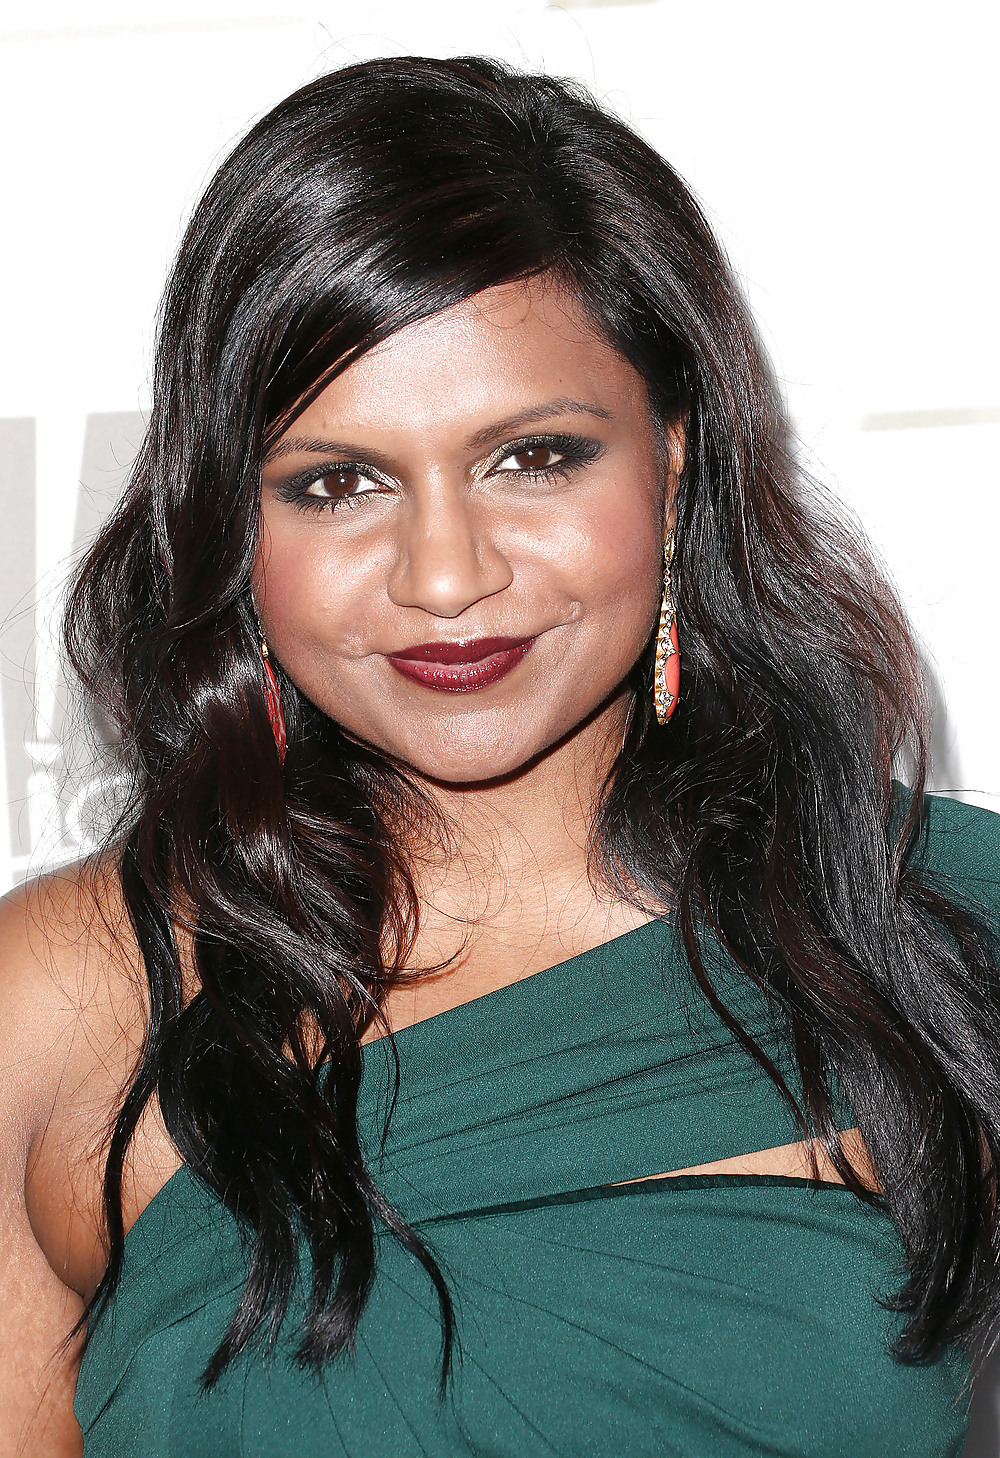 Hot Indian comedian Mindy Kaling - What would you do to her? #16250553